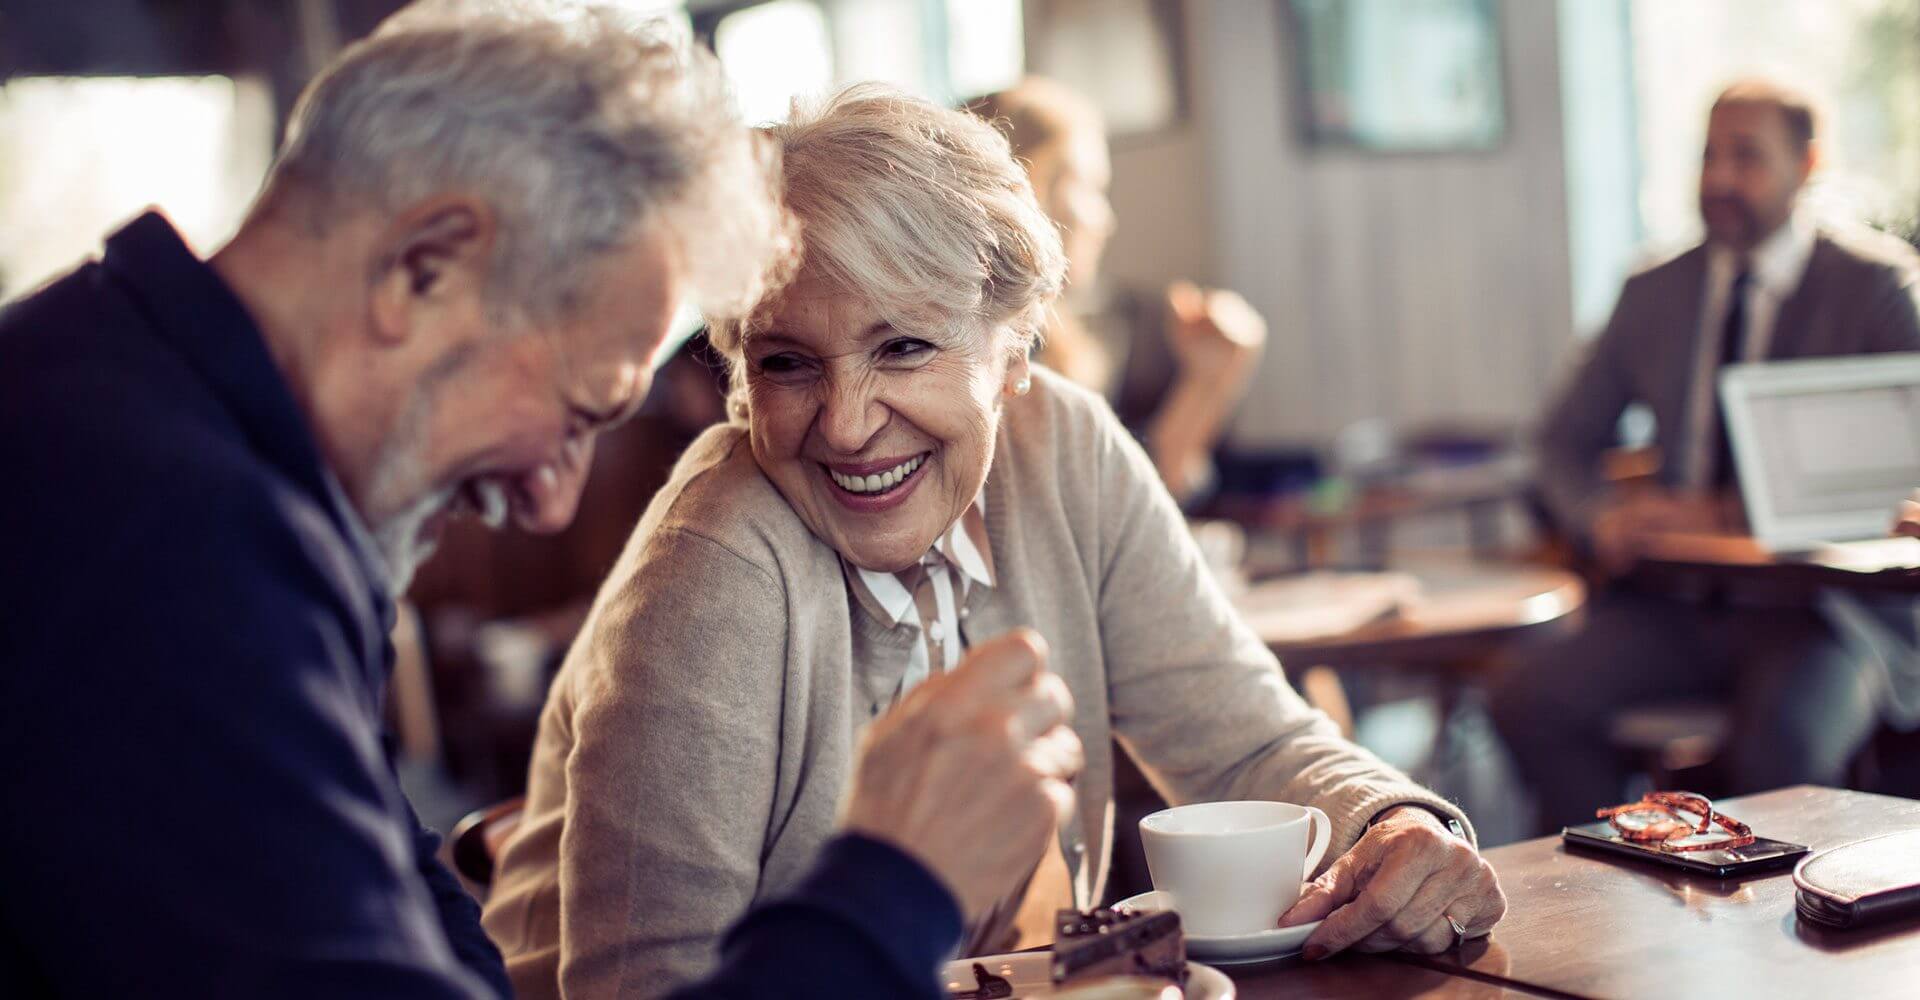 A couple looks overjoyed to know they are still healthy in their later years.